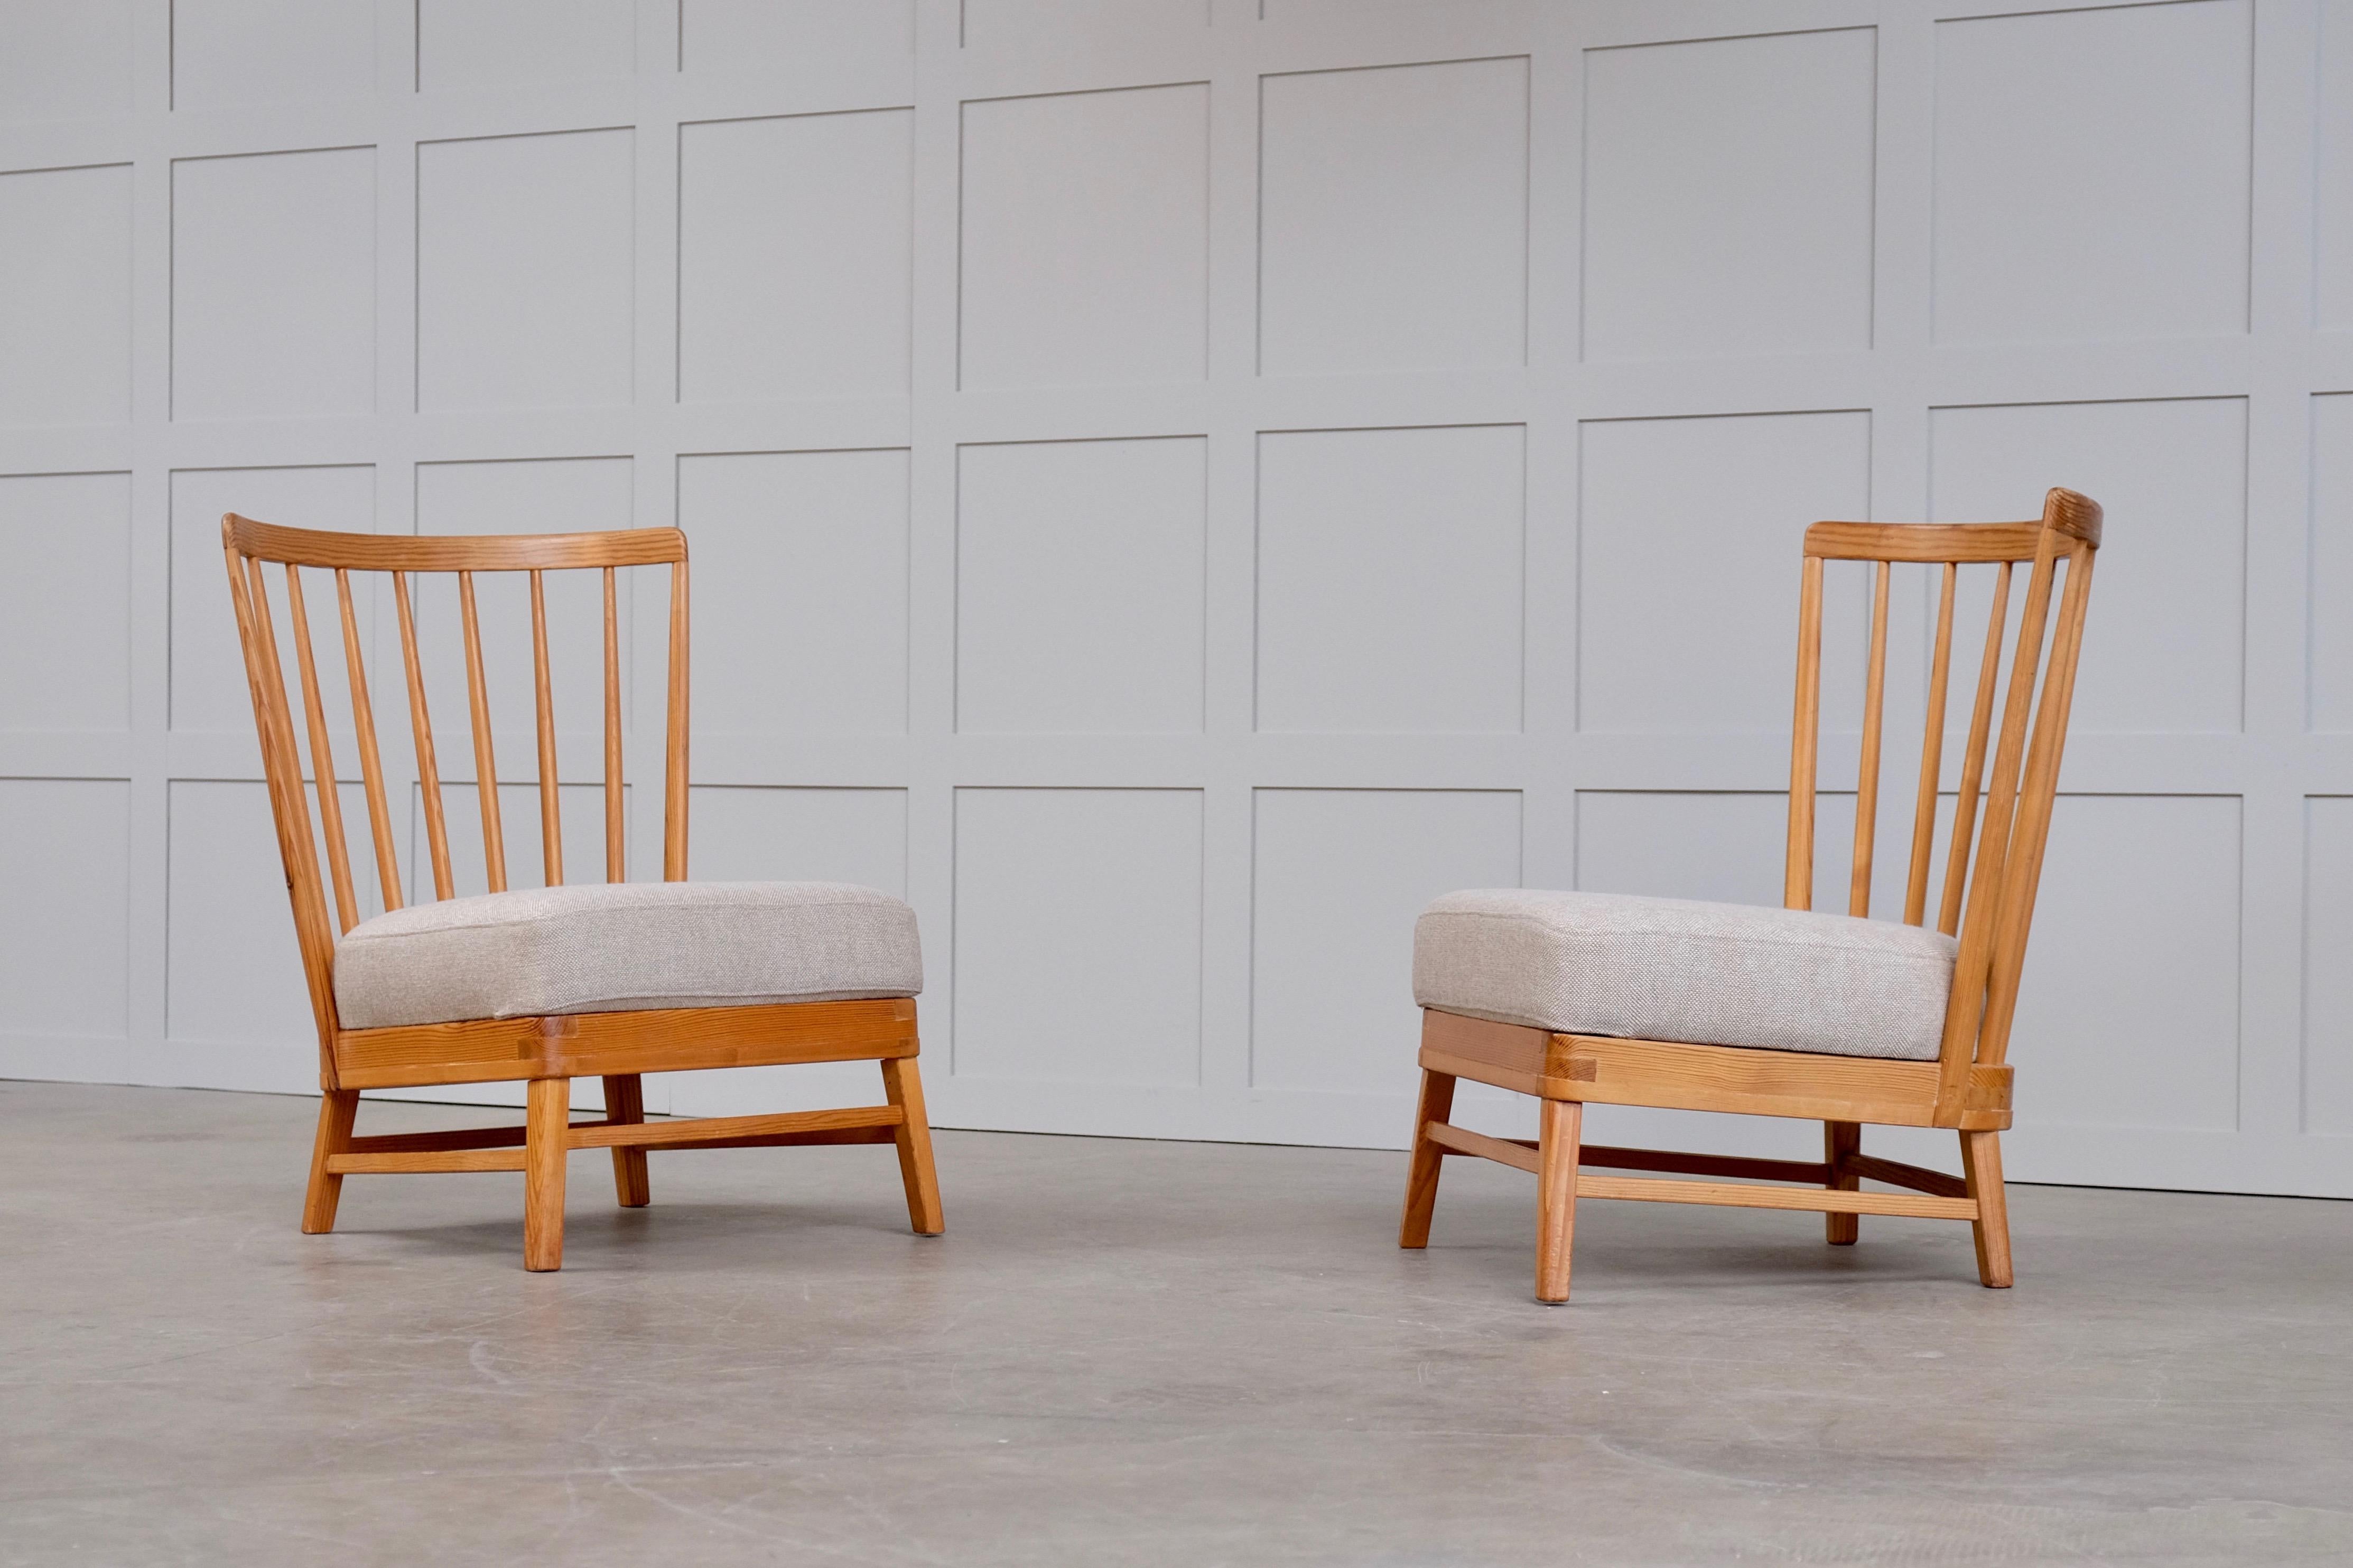 Rare Pair of Swedish Easy Chairs, 1950s For Sale 4